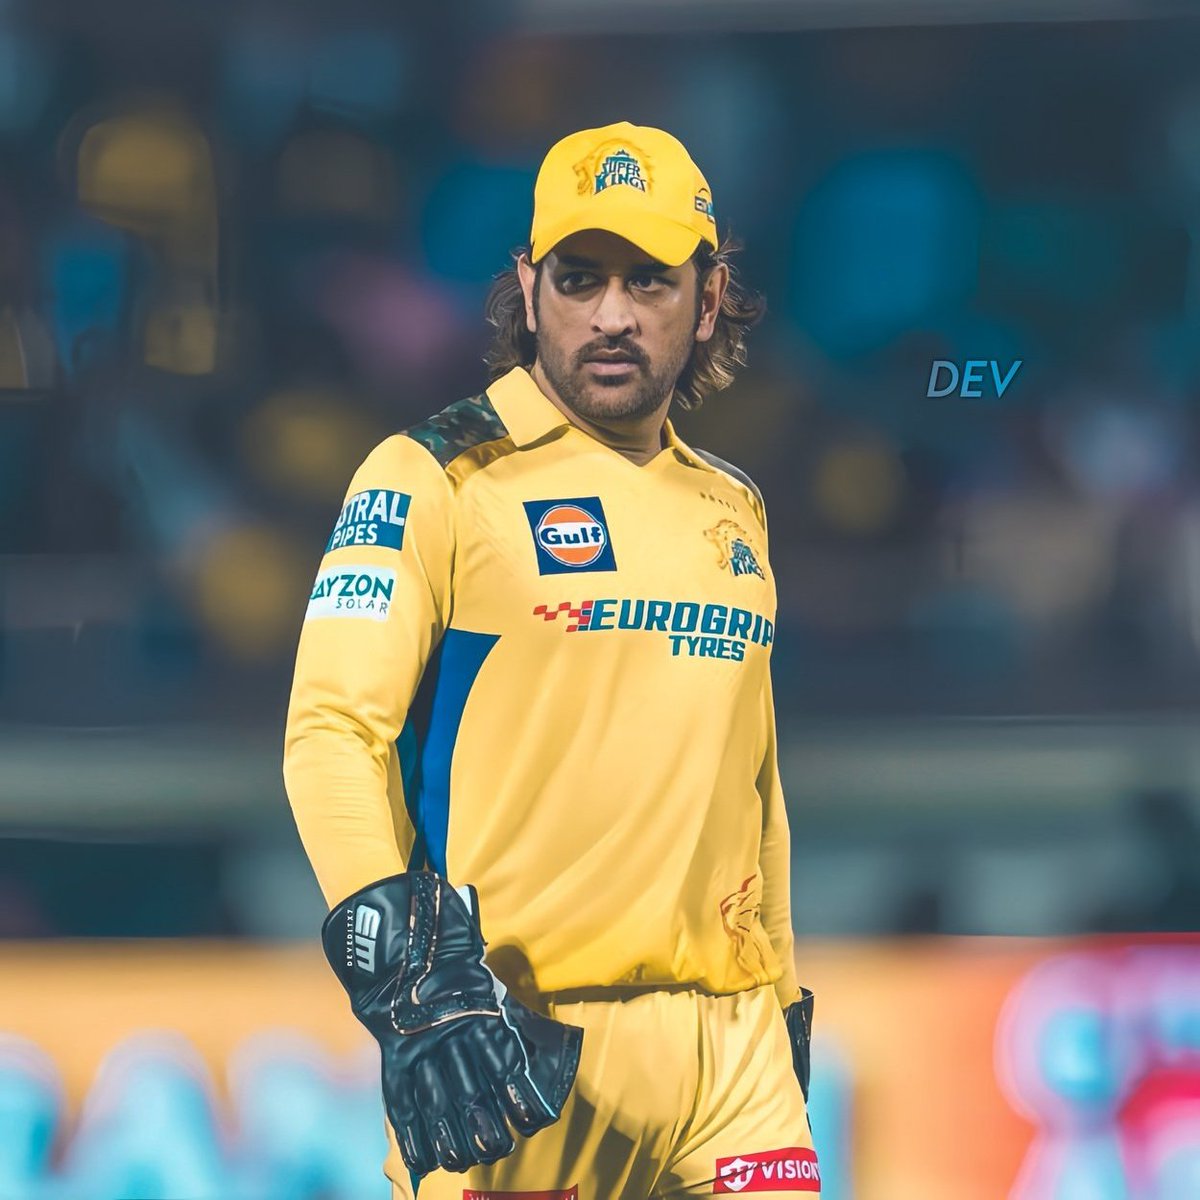 Some records to look forward in upcoming CSK matches💛 A Thread🧵 (1 of 3) > Ruturaj Gaikwad needs 48 runs to become the 4th player to score 2000 IPL runs for CSK. > Dhoni needs 65 runs at Chepauk to become the highest run scorer at the ground in IPL. #IPL2024|@ChennaiIPL